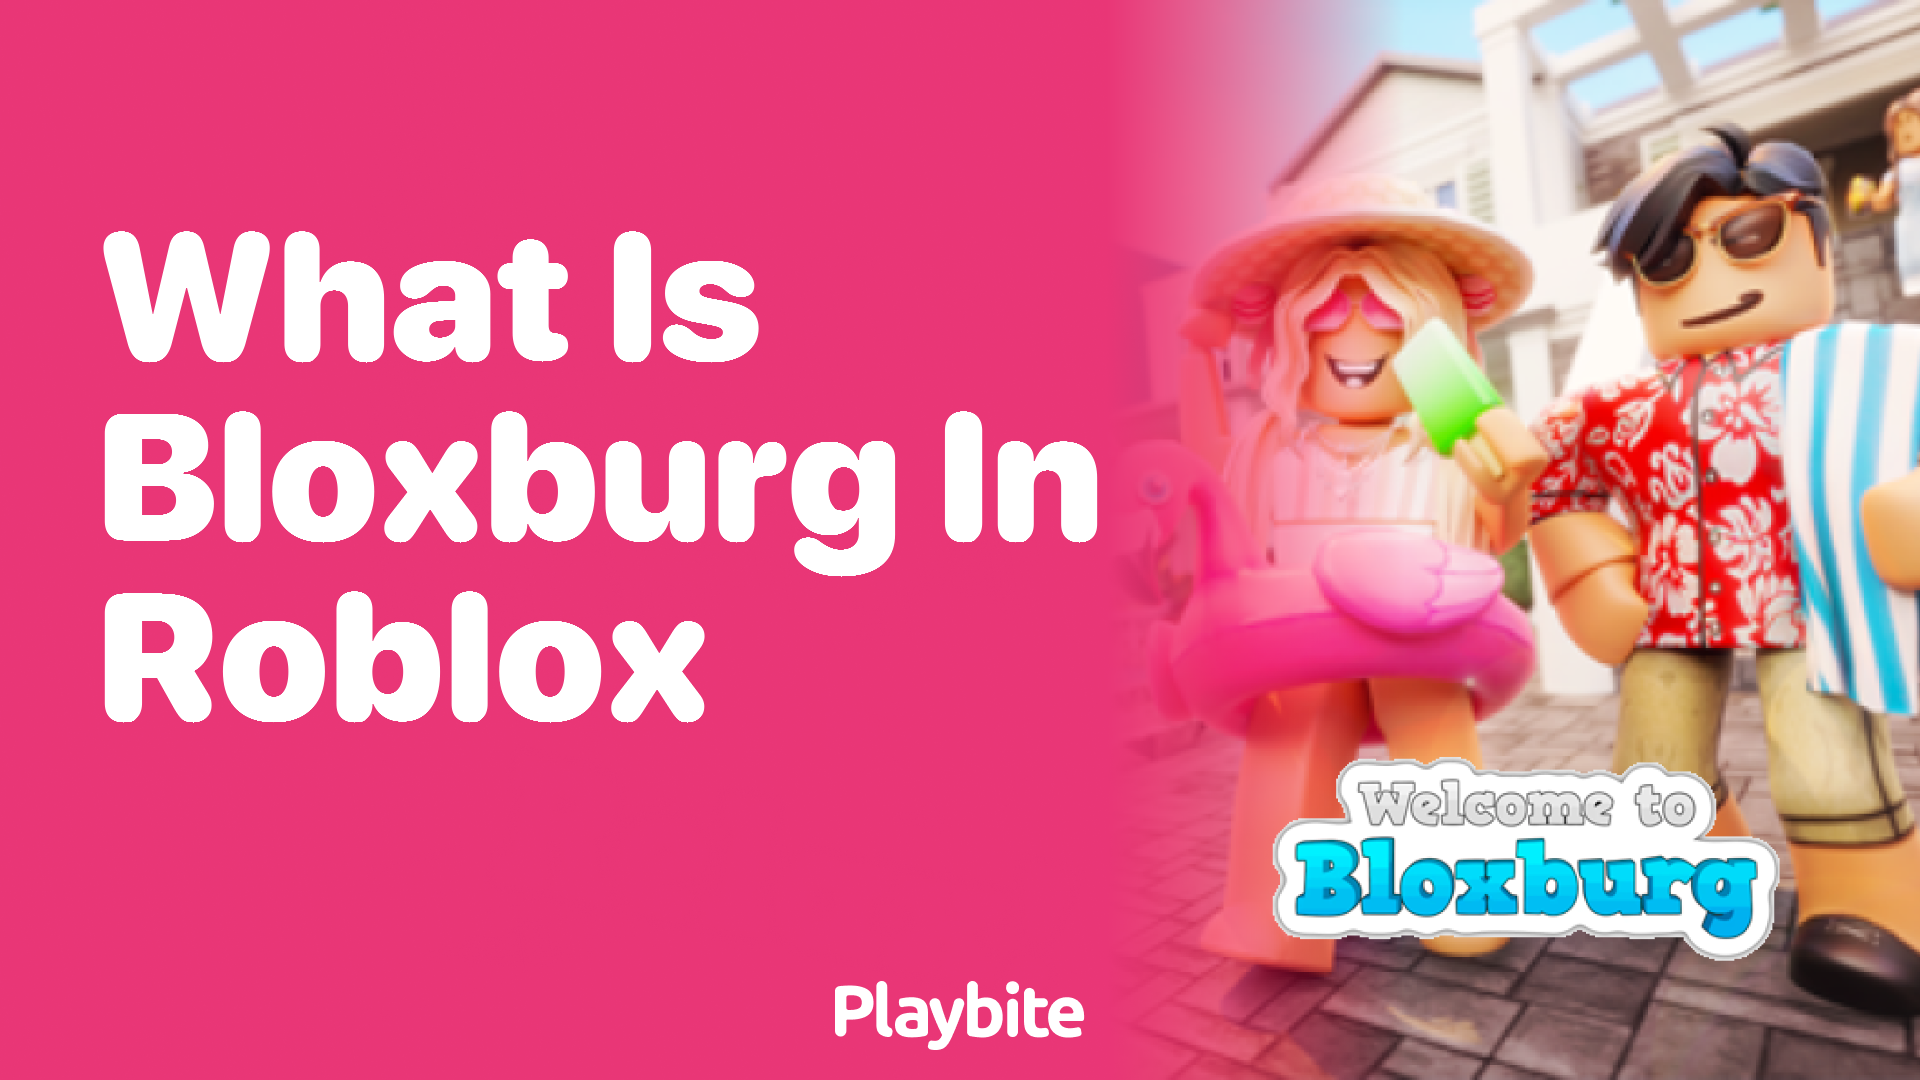 What Is Bloxburg in Roblox? Dive Into This Popular Virtual World